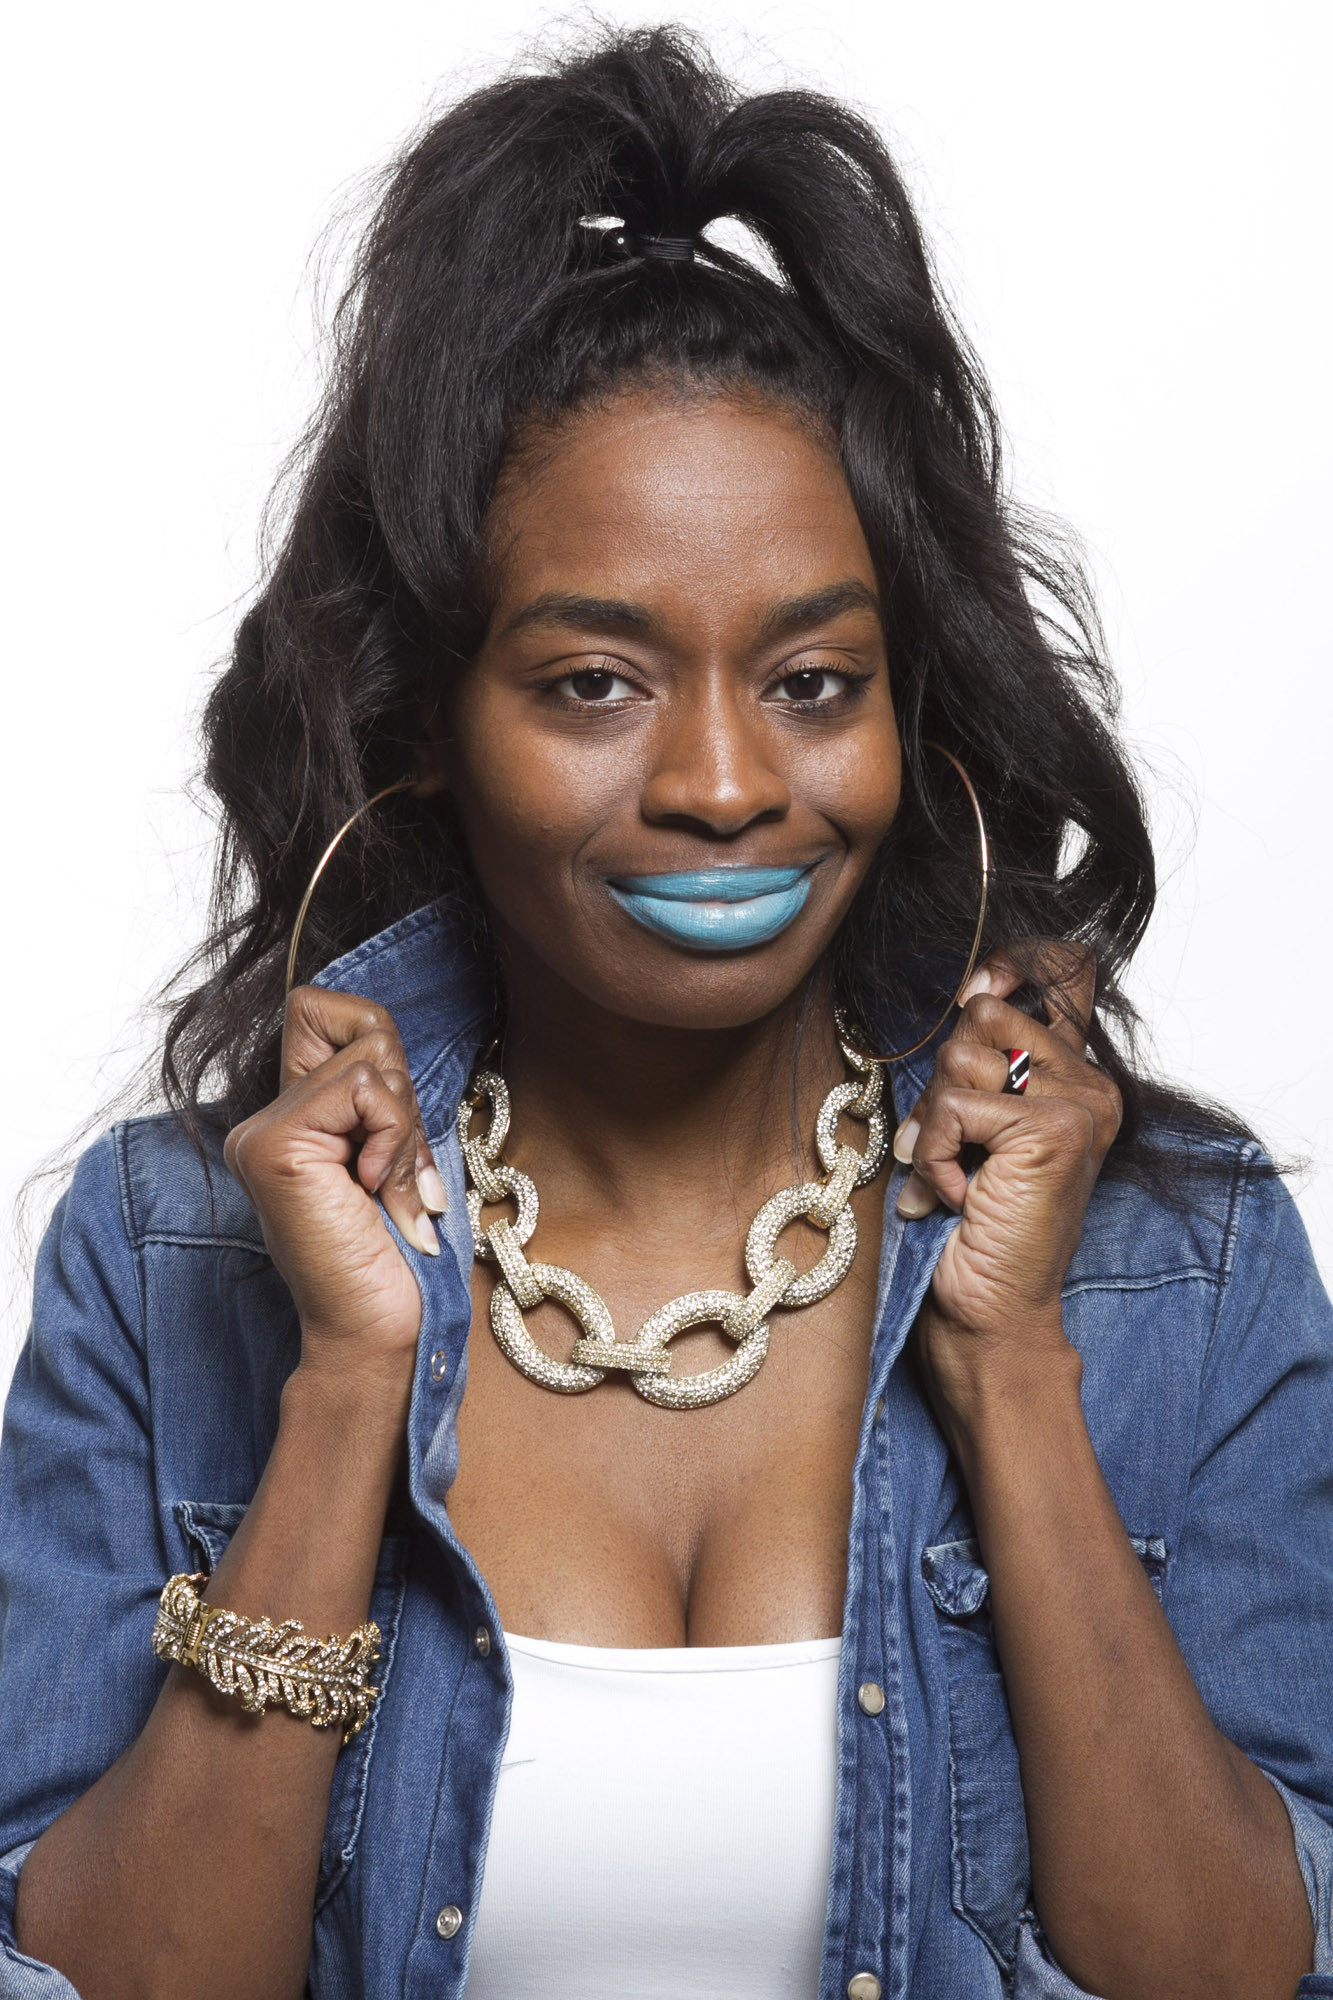 Here's what happens when you wear blue lipstick | New York Post